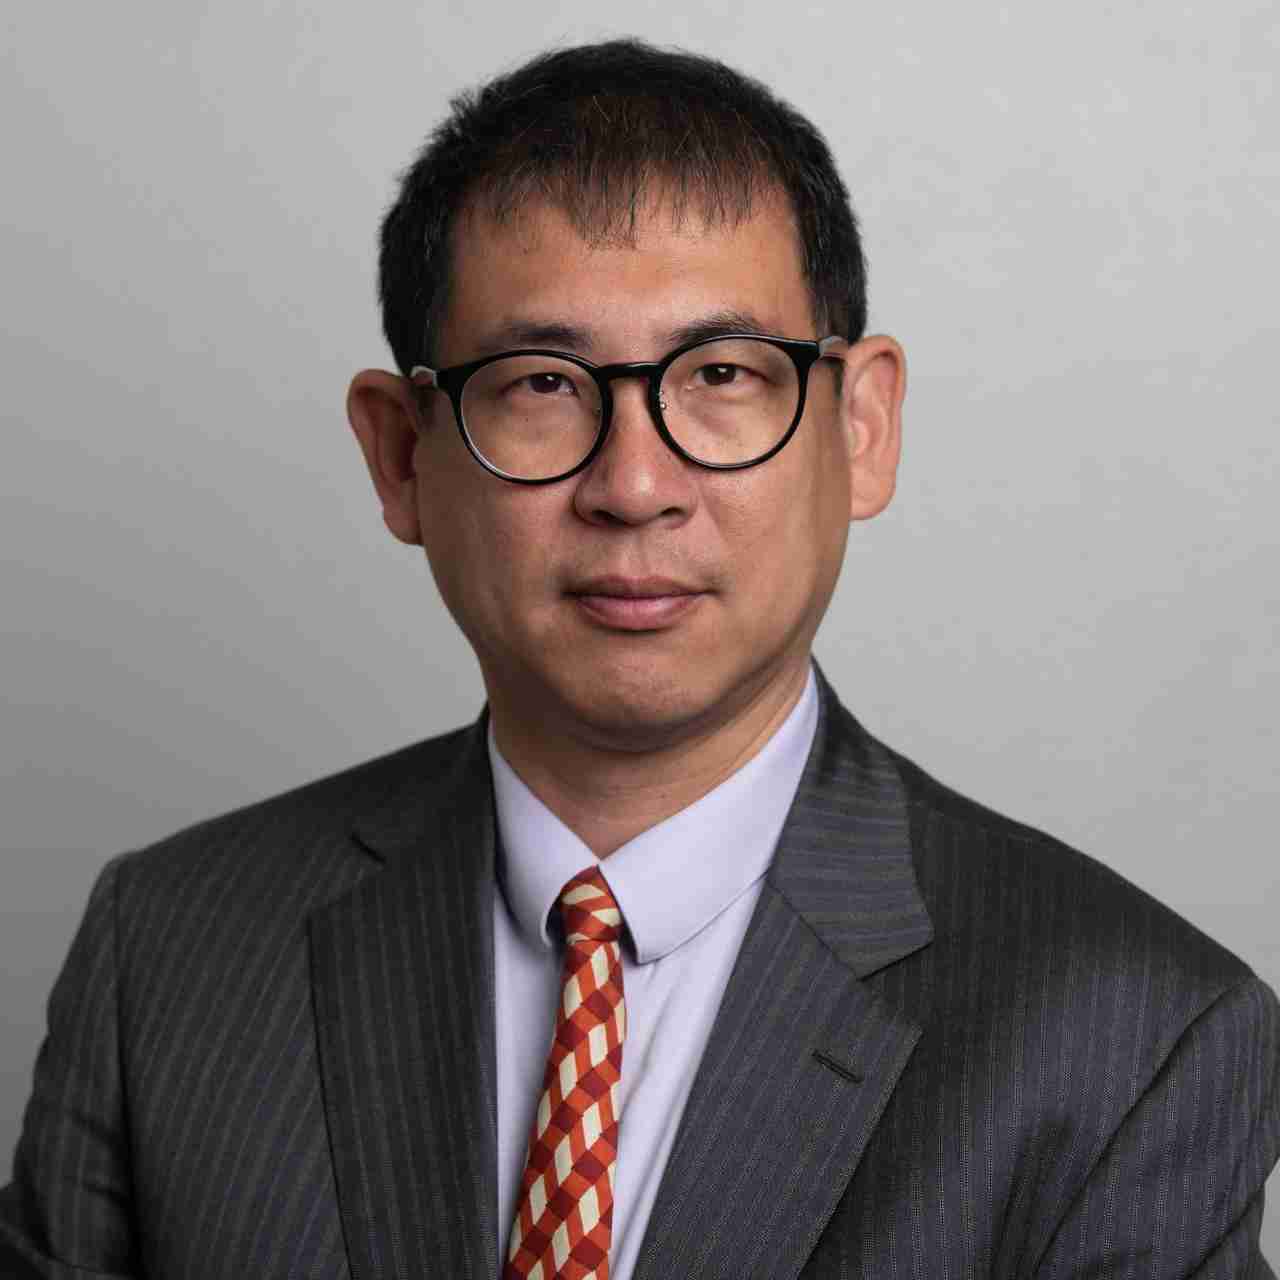 Profile image of Professor Andy Chan